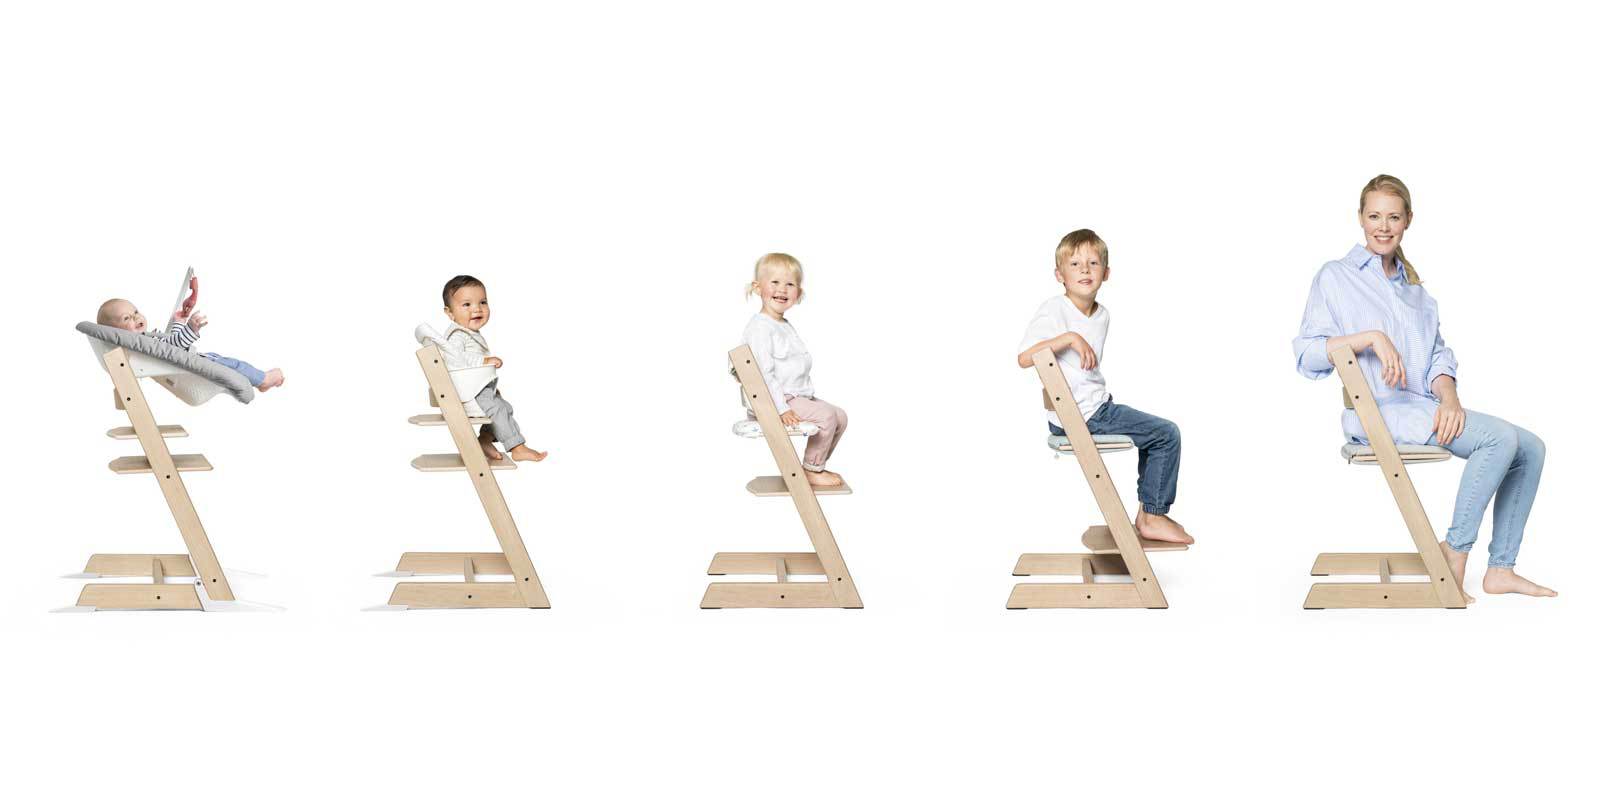 Five cream Stokke Tripp Trapp High Chairs , each seating either a baby, a child, or an adult. Set against a white background.